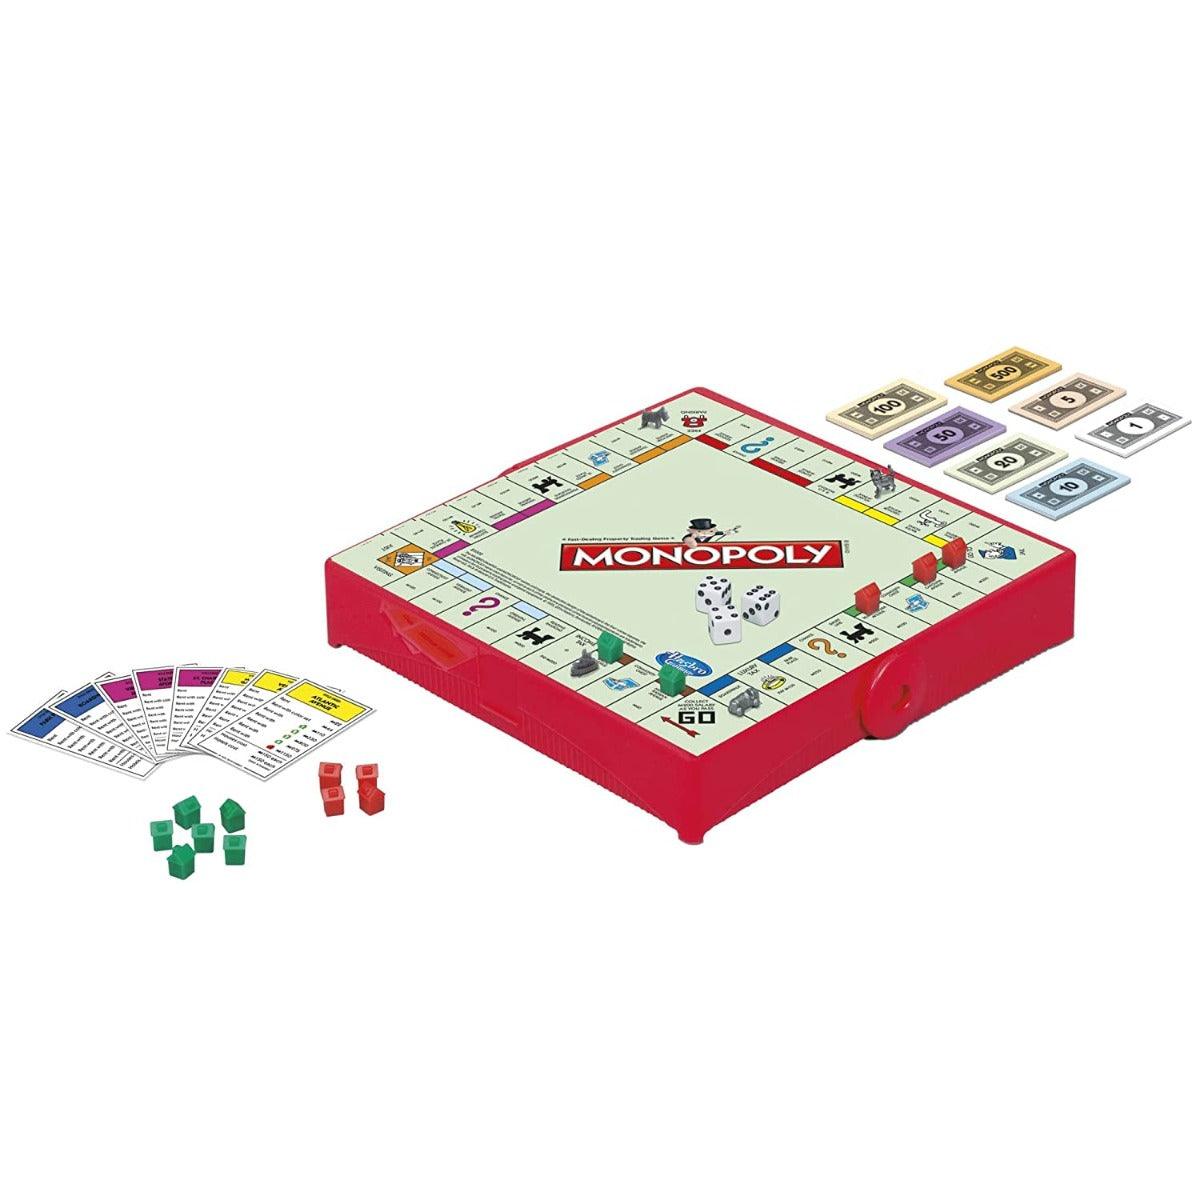 Hasbro Gaming Monopoly Grab & Go Game - Portable 4 Player Game for Ages 8 and Up